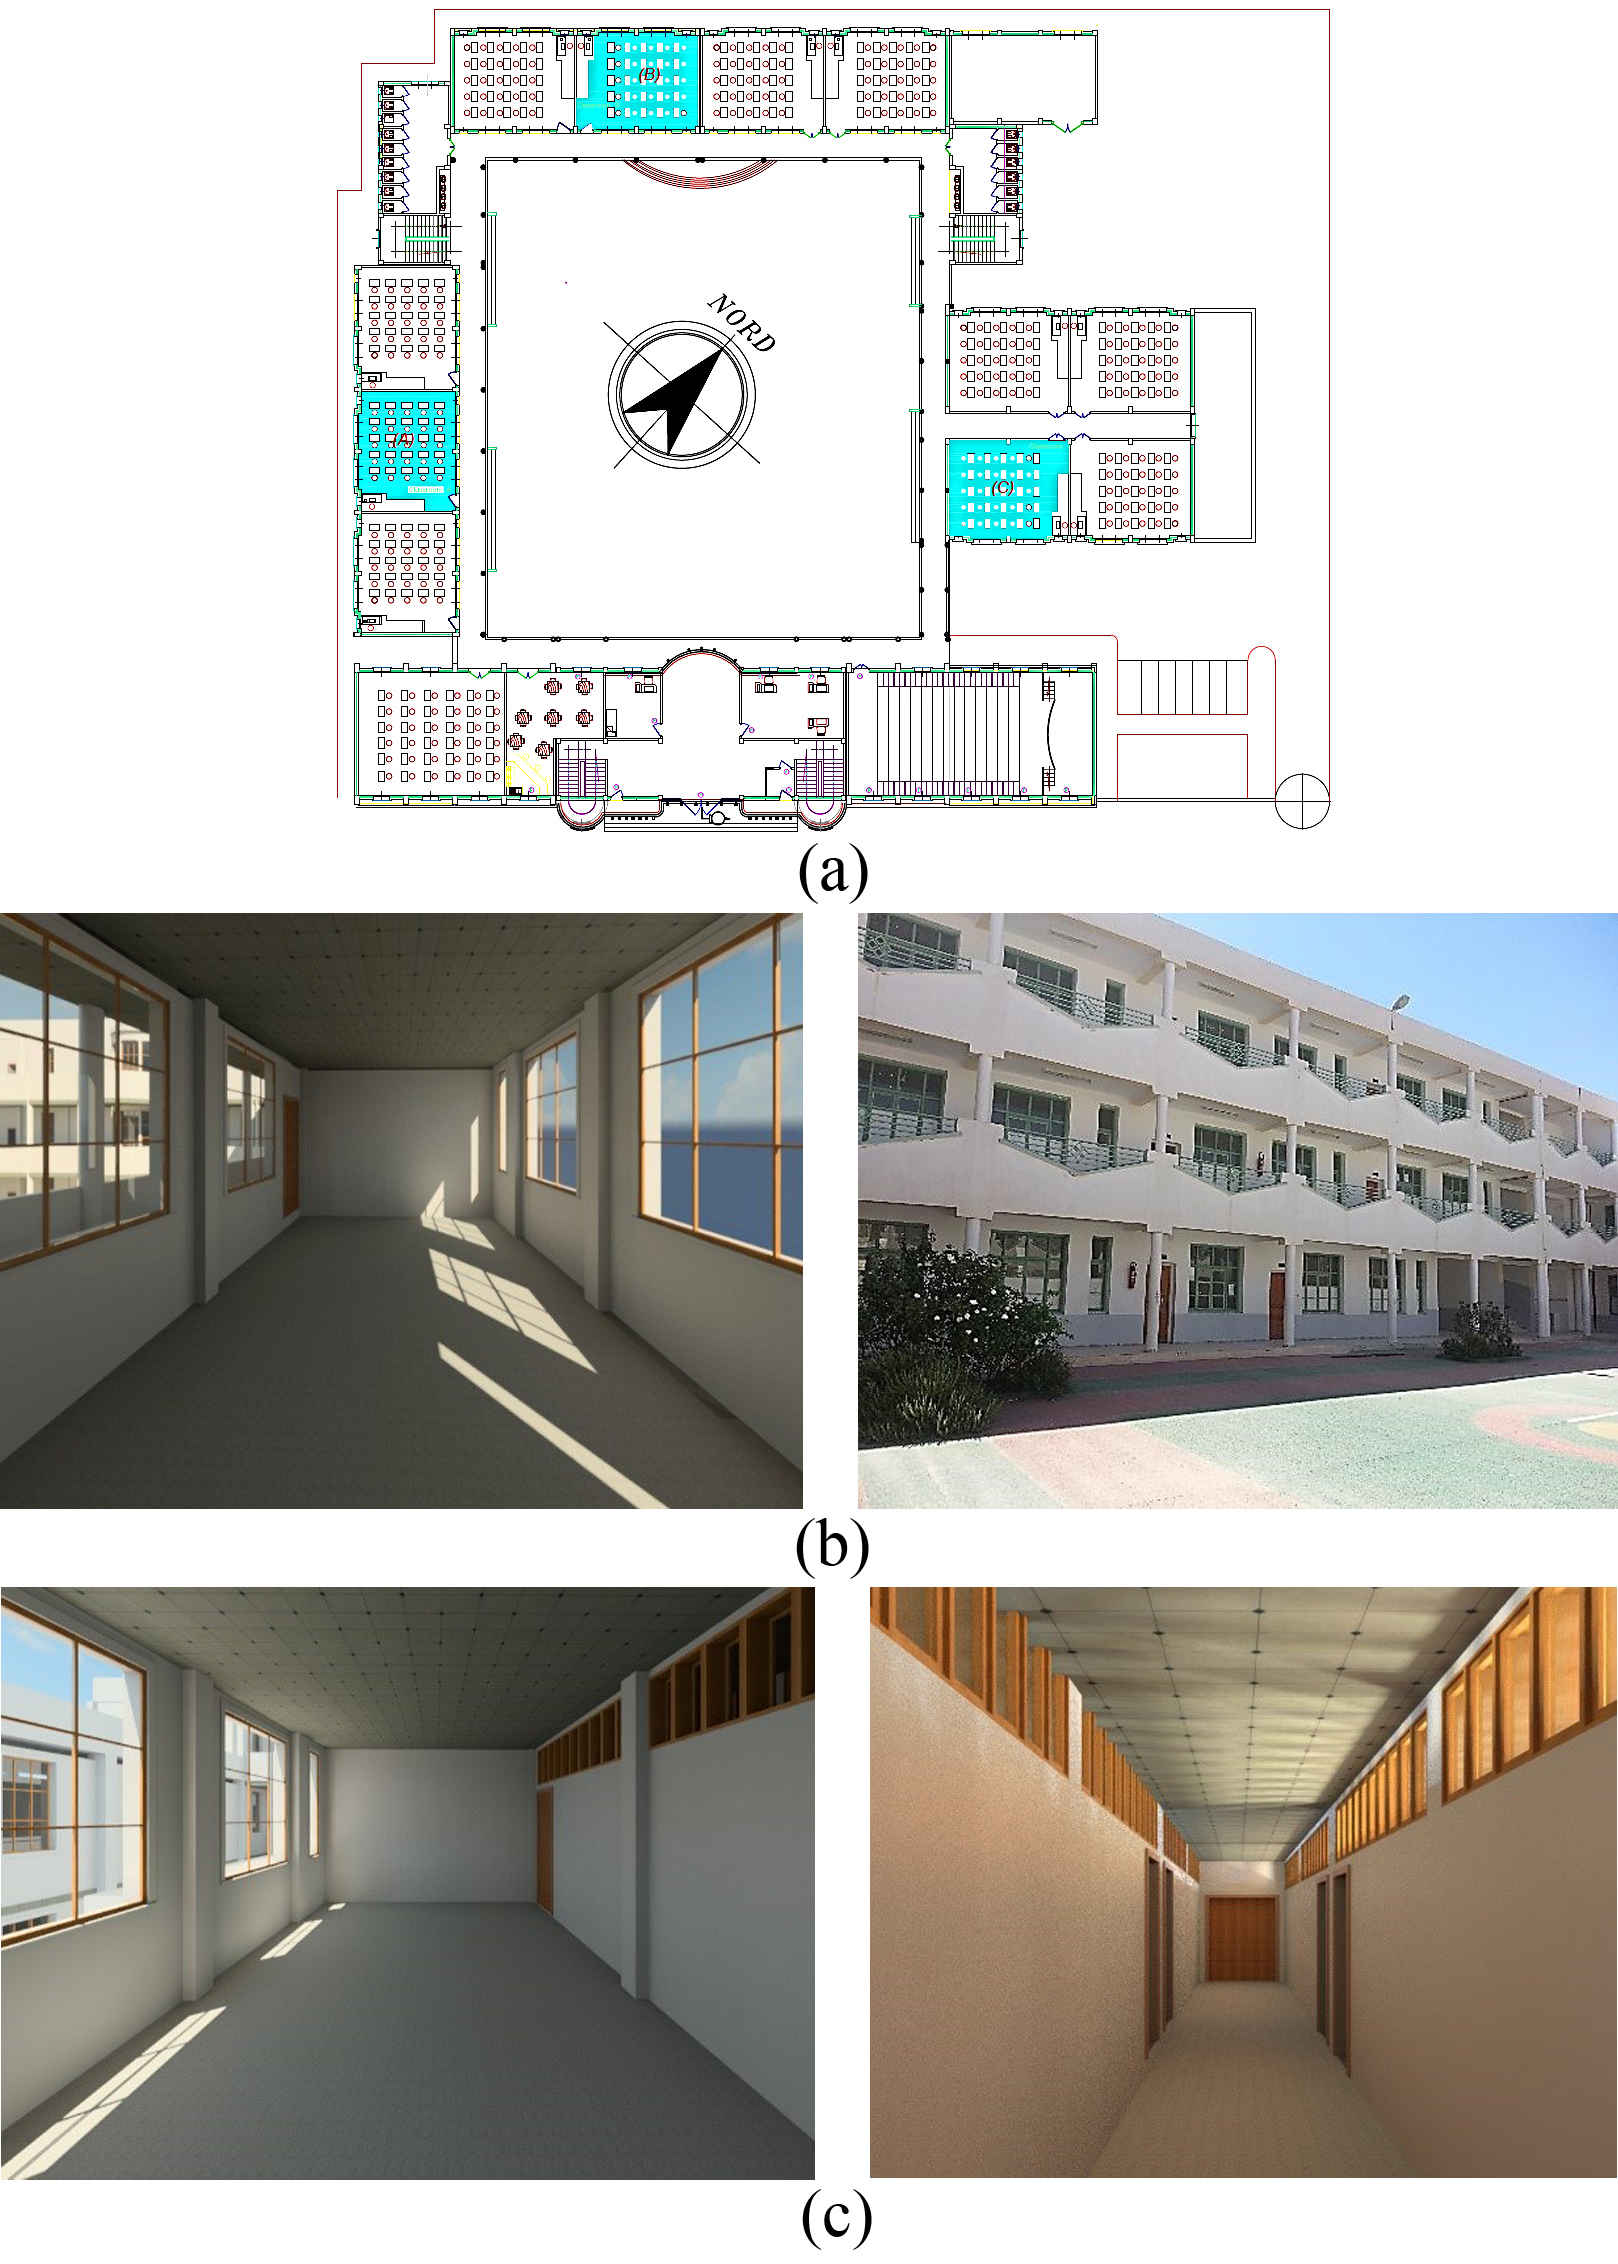 (a) The location and orientations of classrooms tested, (b) bilateral typology with overhang, and (c) clerestory typology without overhang.